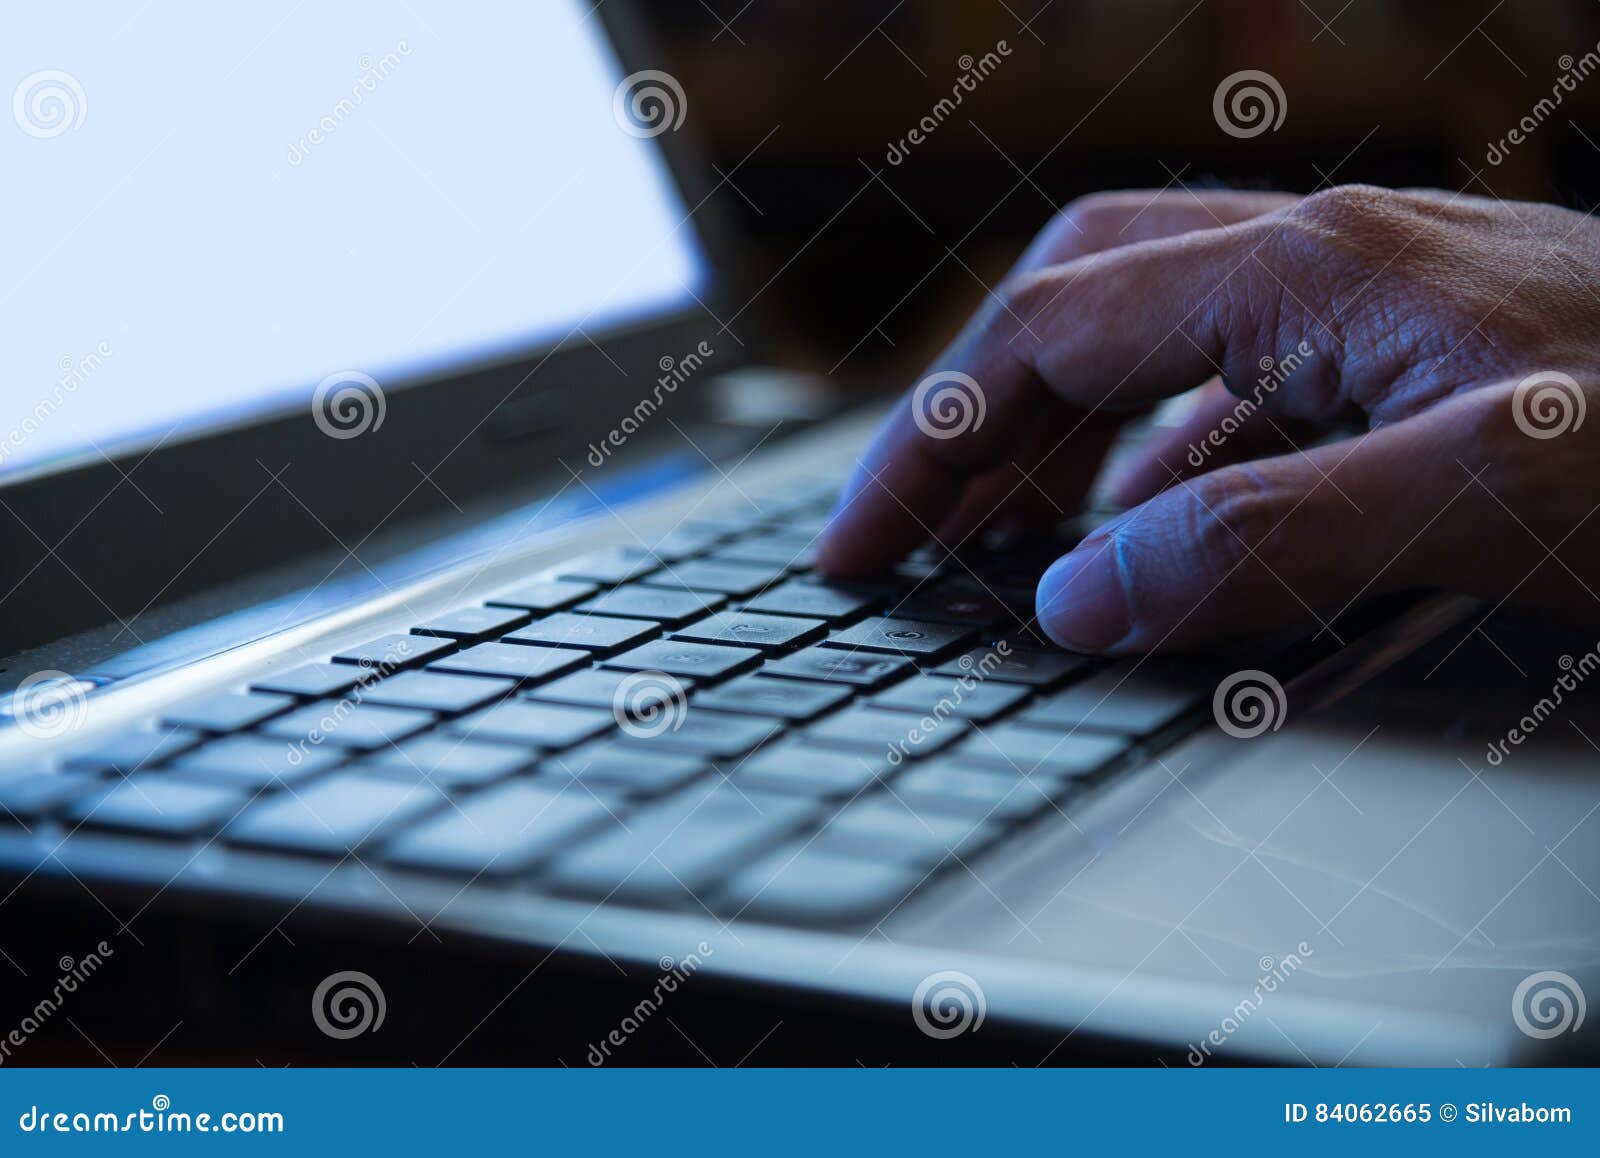 selective focus on man hand typing laptop/pc/computer keyboard i